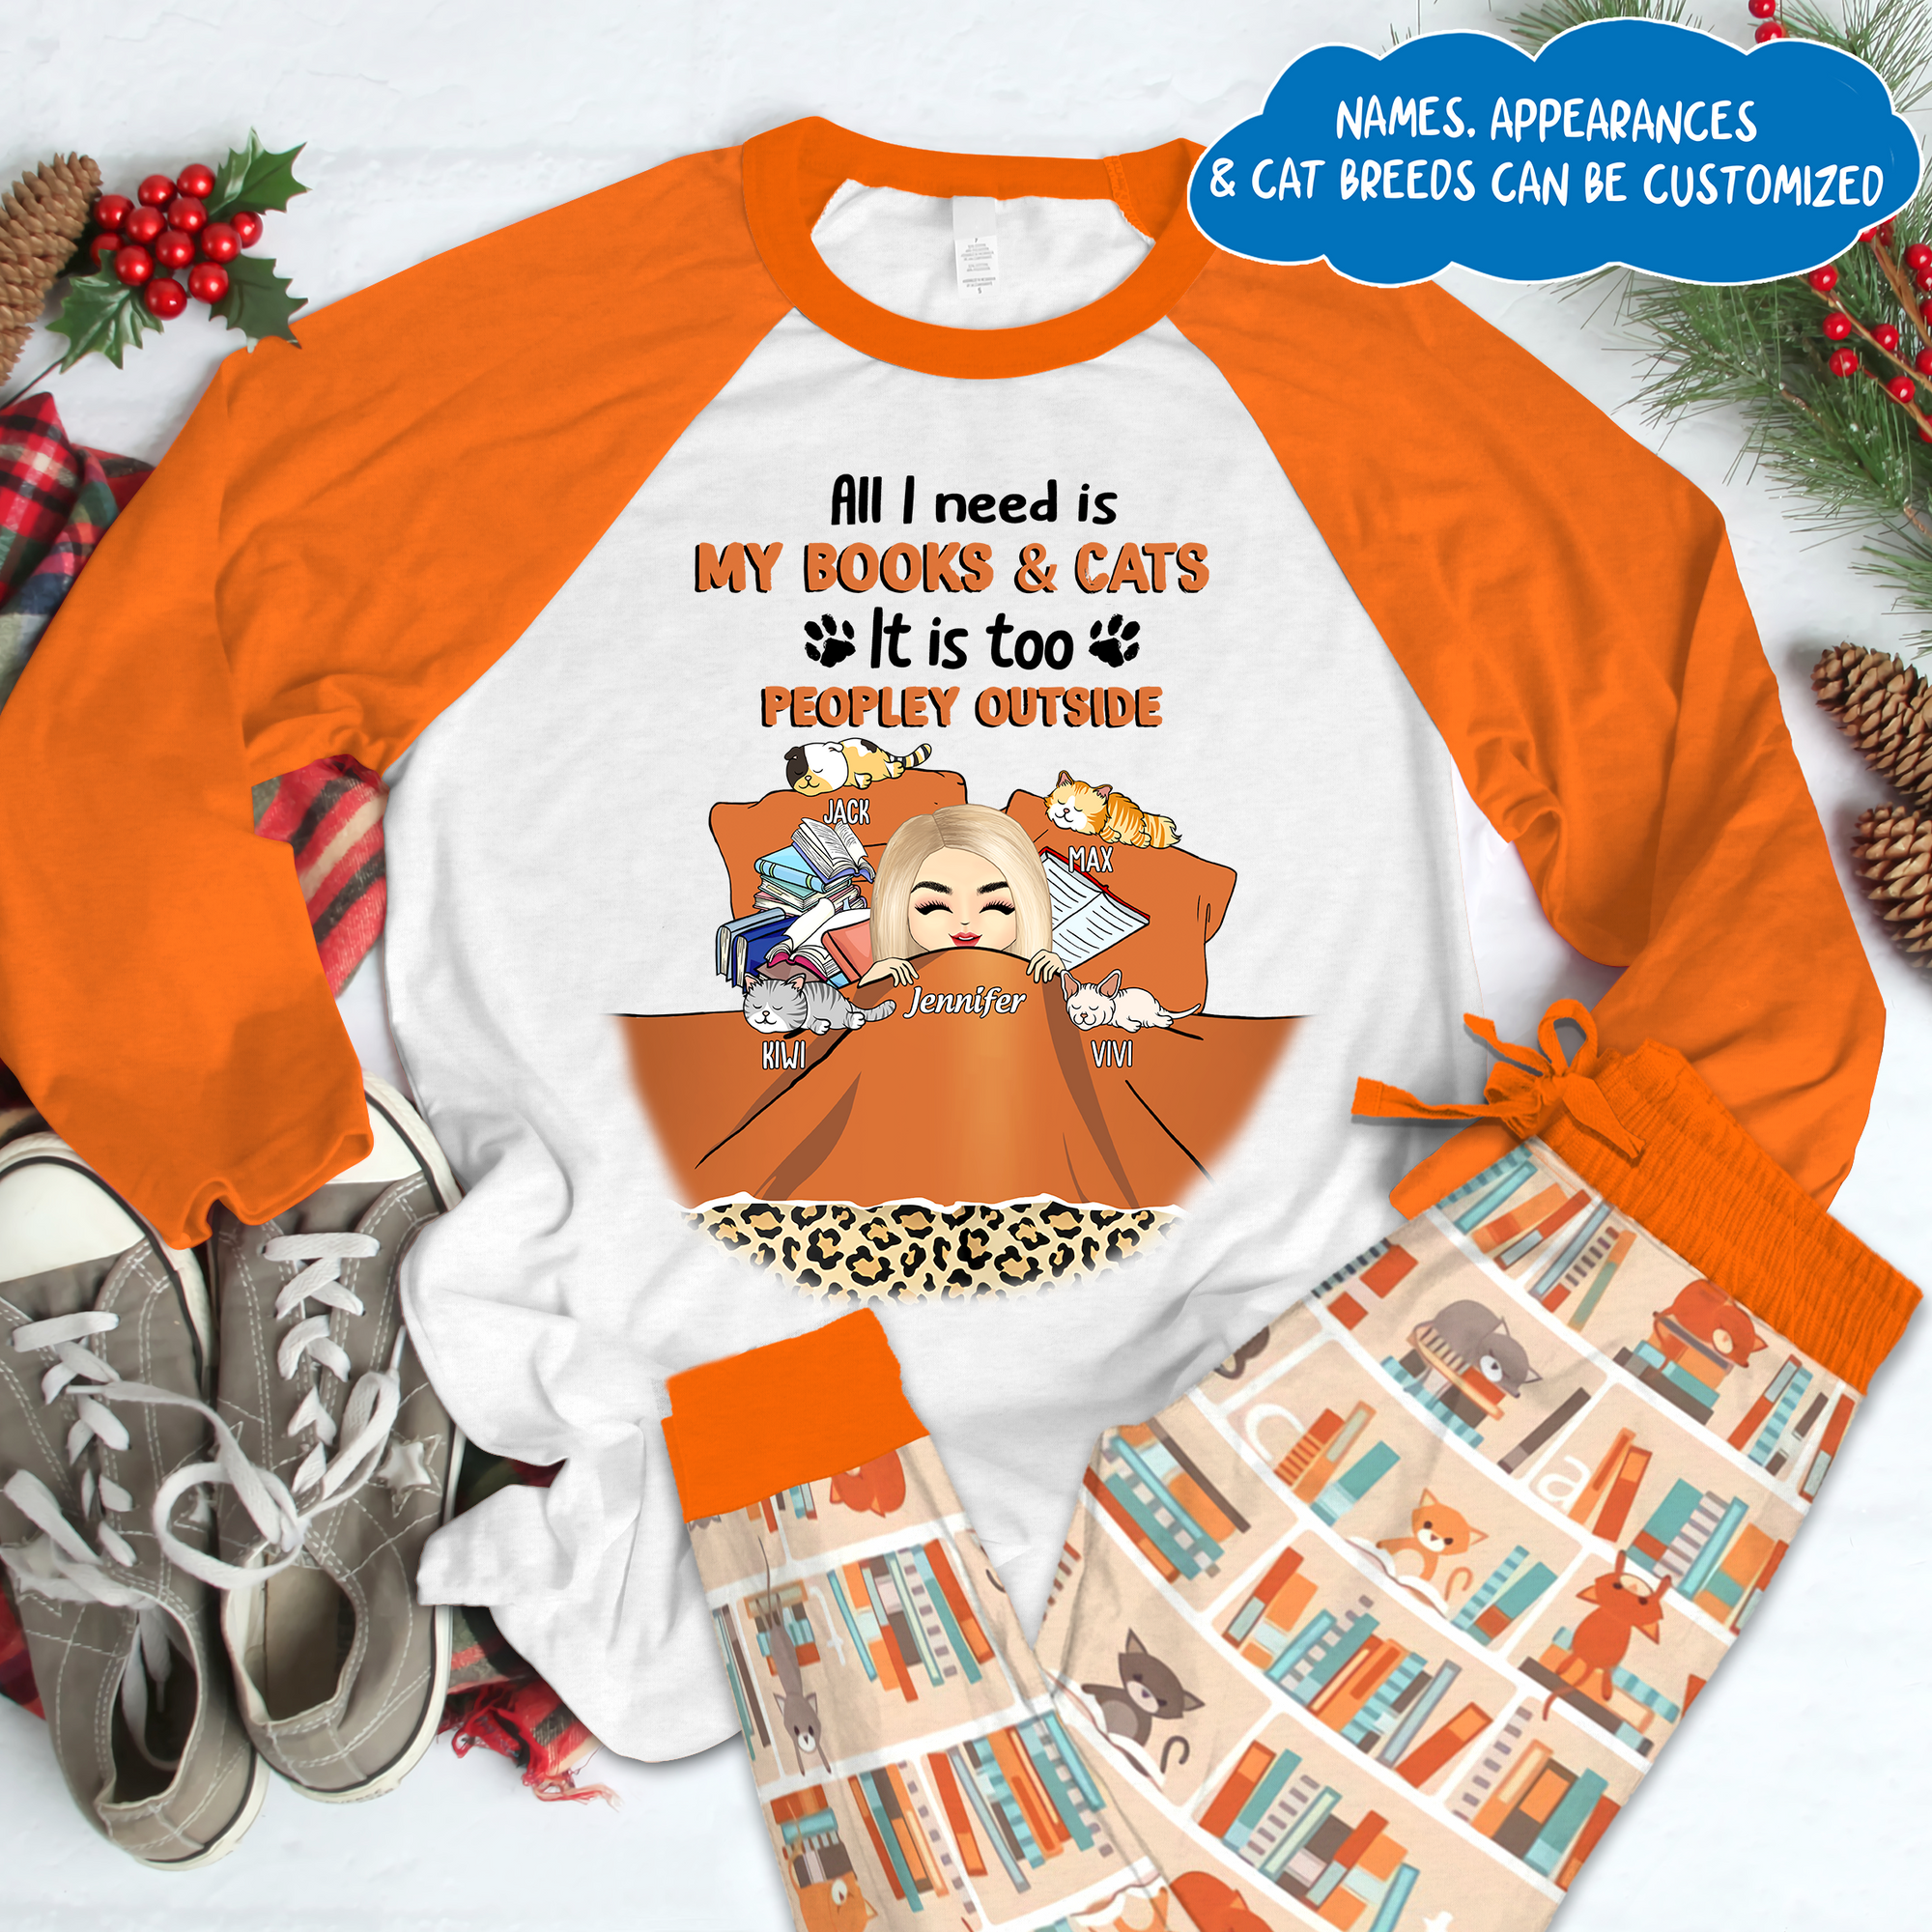 Personalized Pajama Set - Gift For Book & Cat Lovers - All I Want Is My Books & Cats